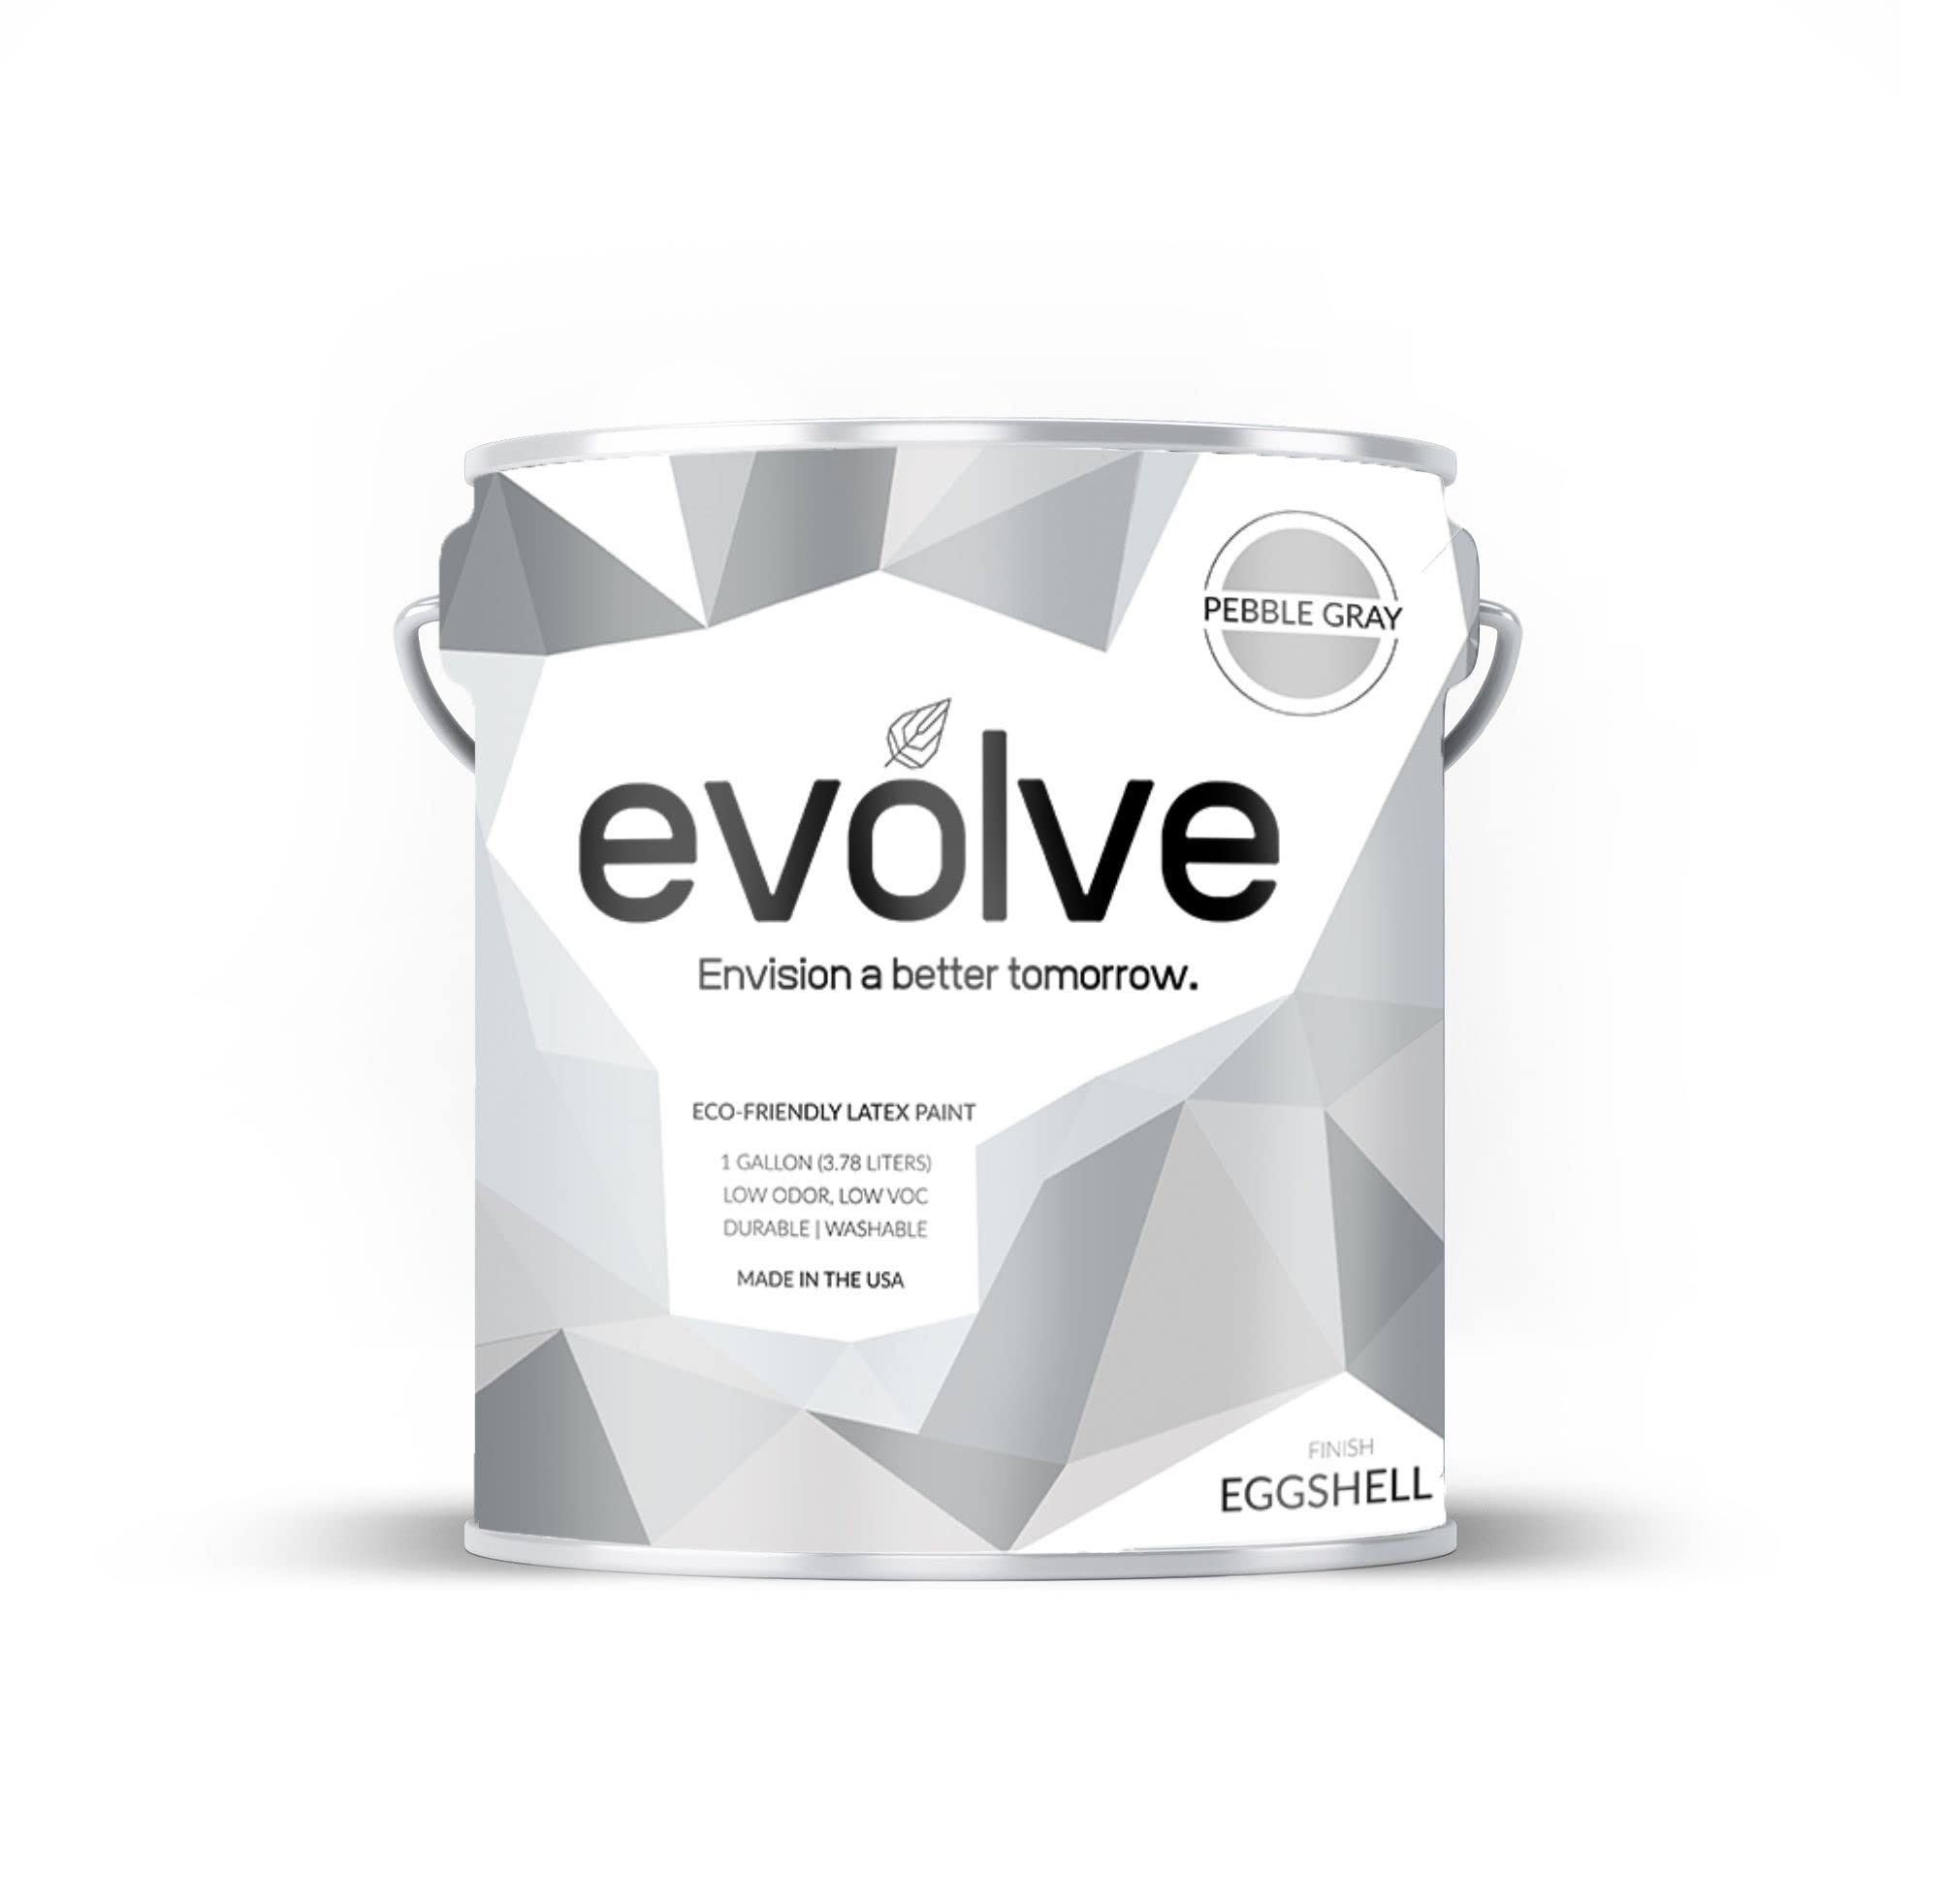 Evolve Paint & Primer: Environment-friendly, Low Sheen with One-Coat Coverage for Interior & Exterior Surfaces (Pebble Gray, 1-Gallon)